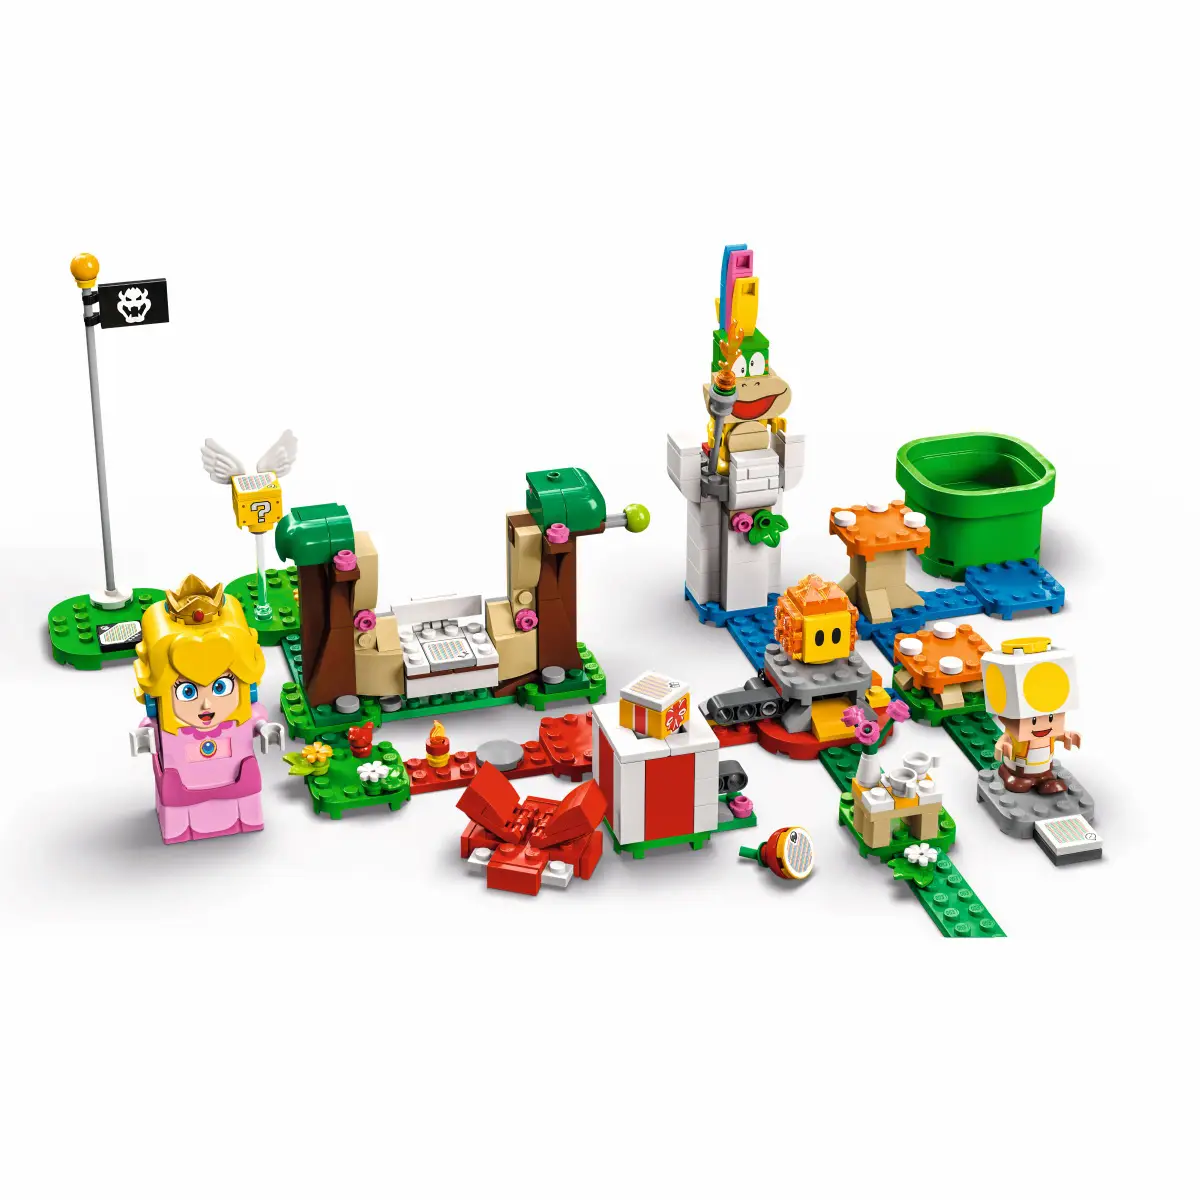 A group of lego blocks

Description automatically generated